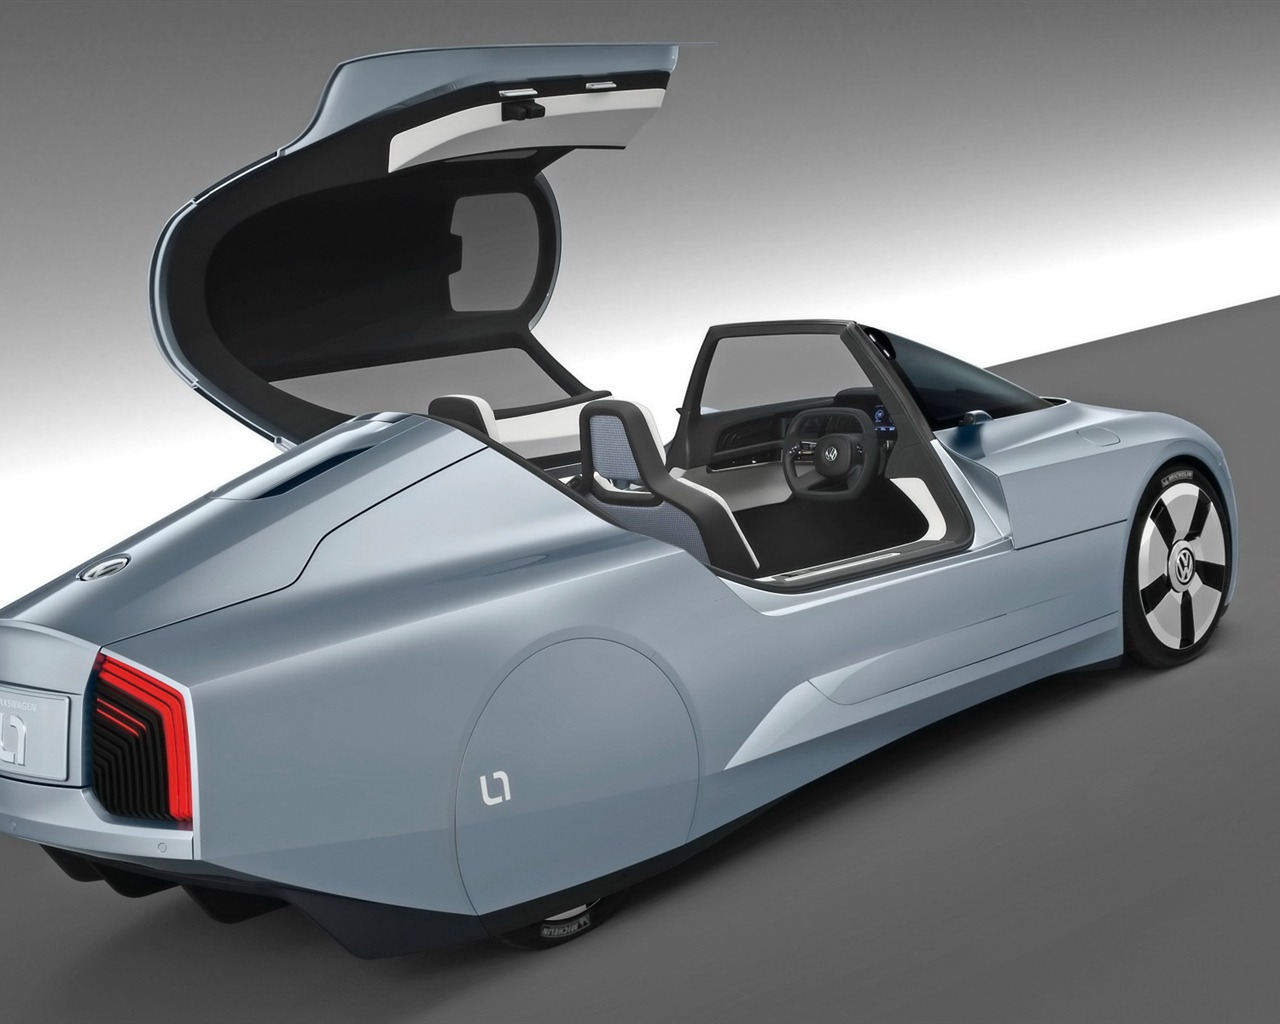 Volkswagen L1 Tapety Concept Car #24 - 1280x1024